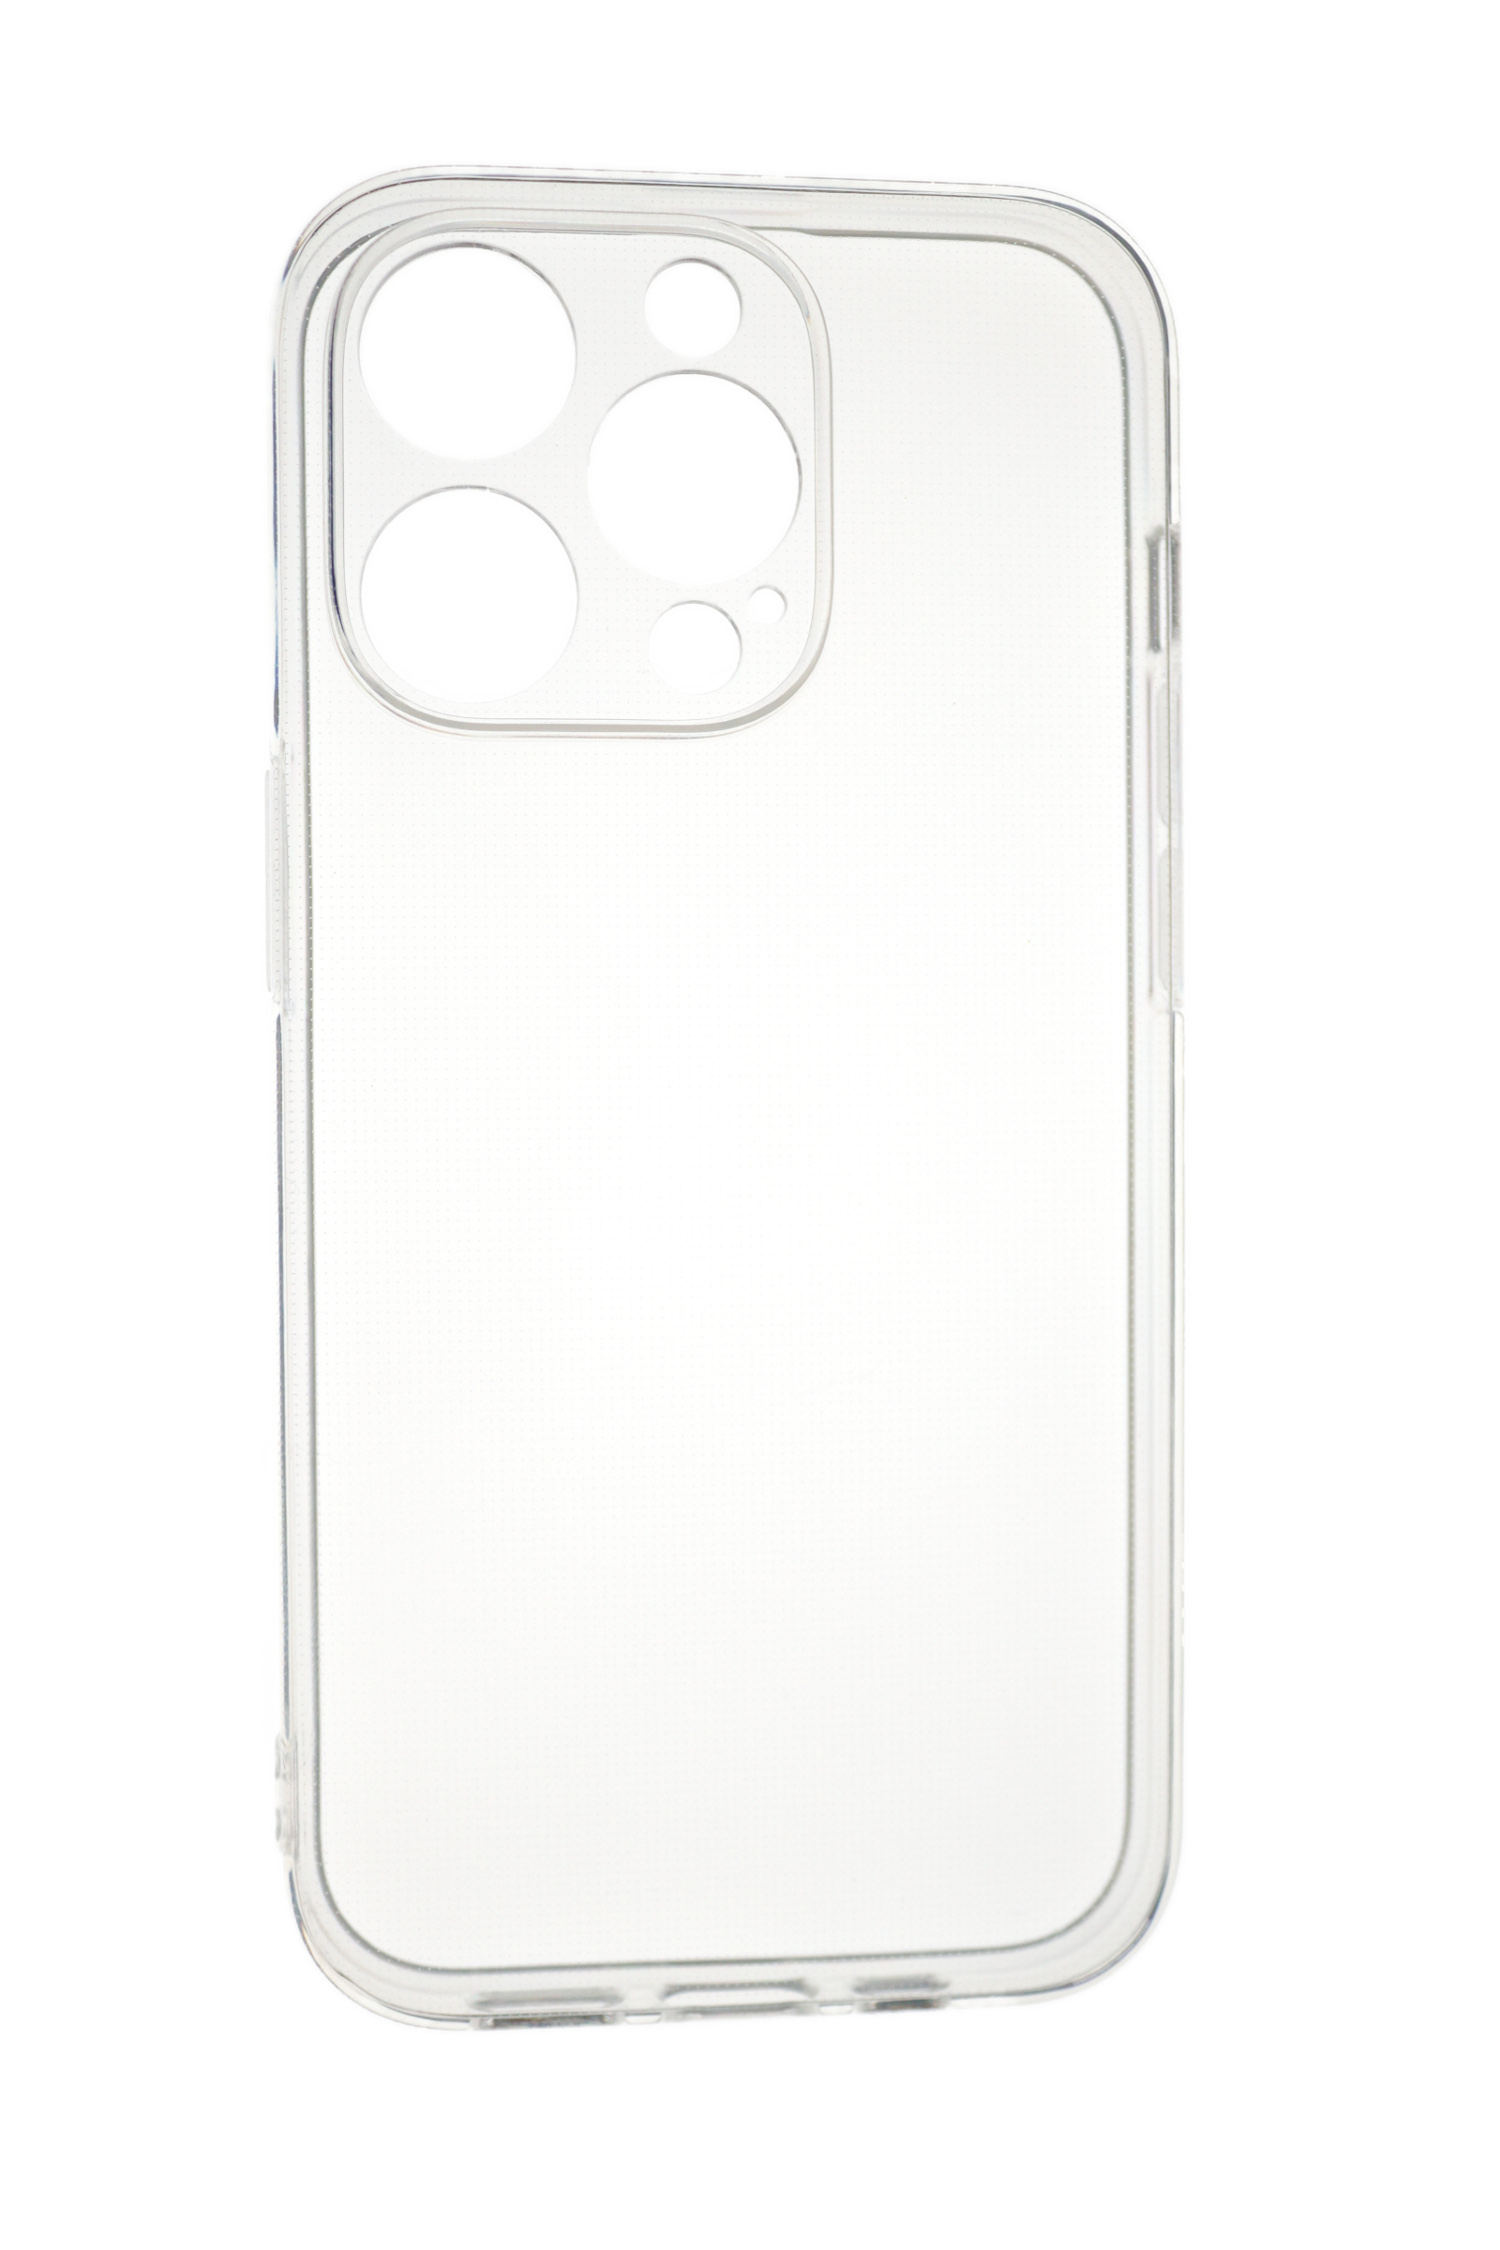 JAMCOVER 2.0 mm 15 Pro, Backcover, Strong, Transparent TPU iPhone Apple, Case